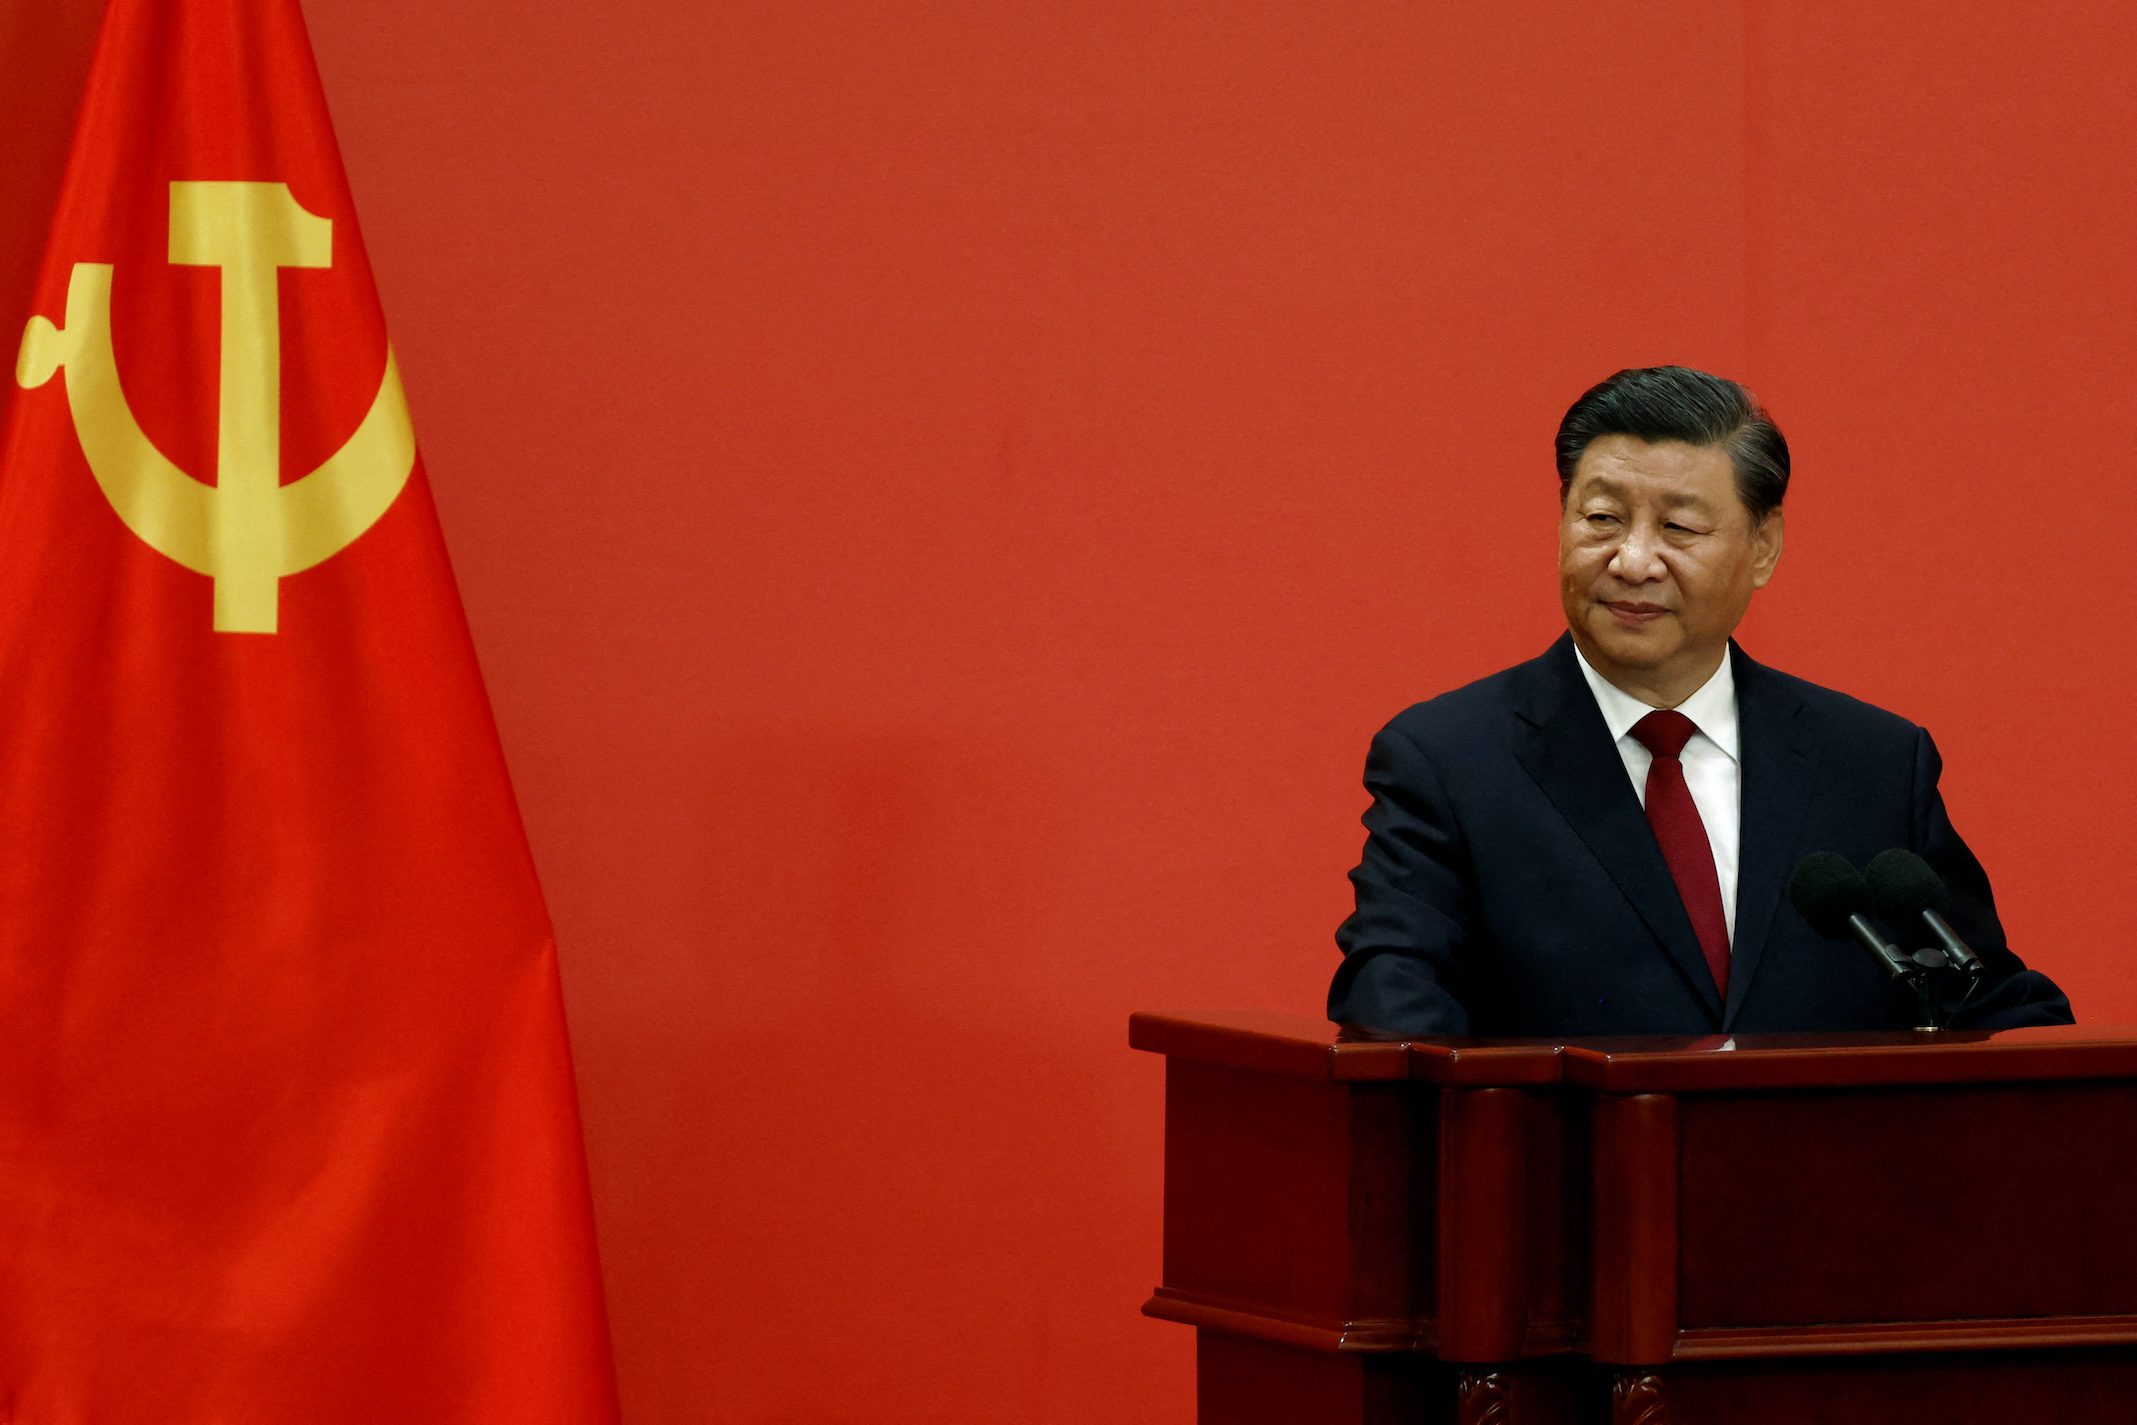 China’s Xi solidified grip on power during tumultuous 2022